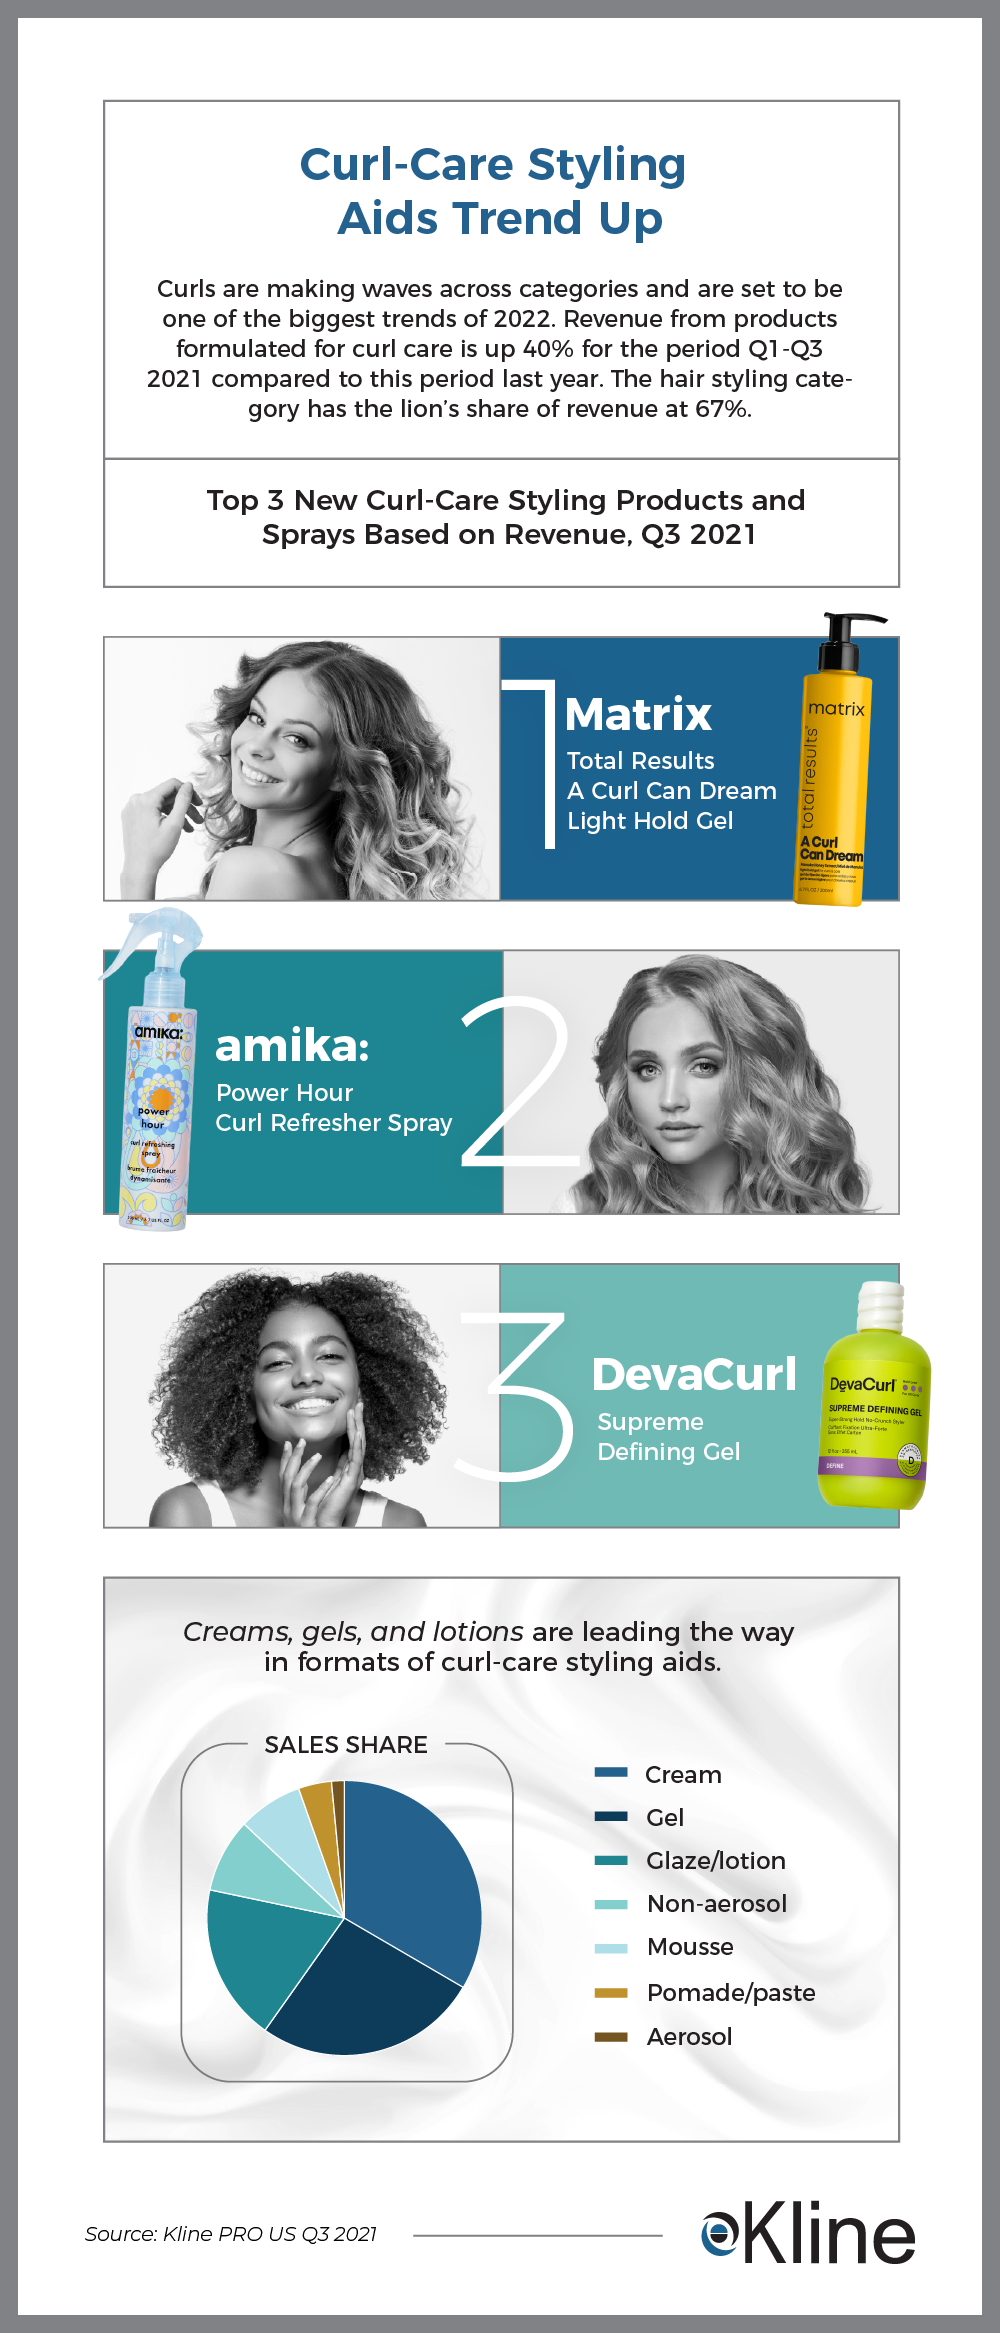 Curl-Care Styling Aids Trend Up